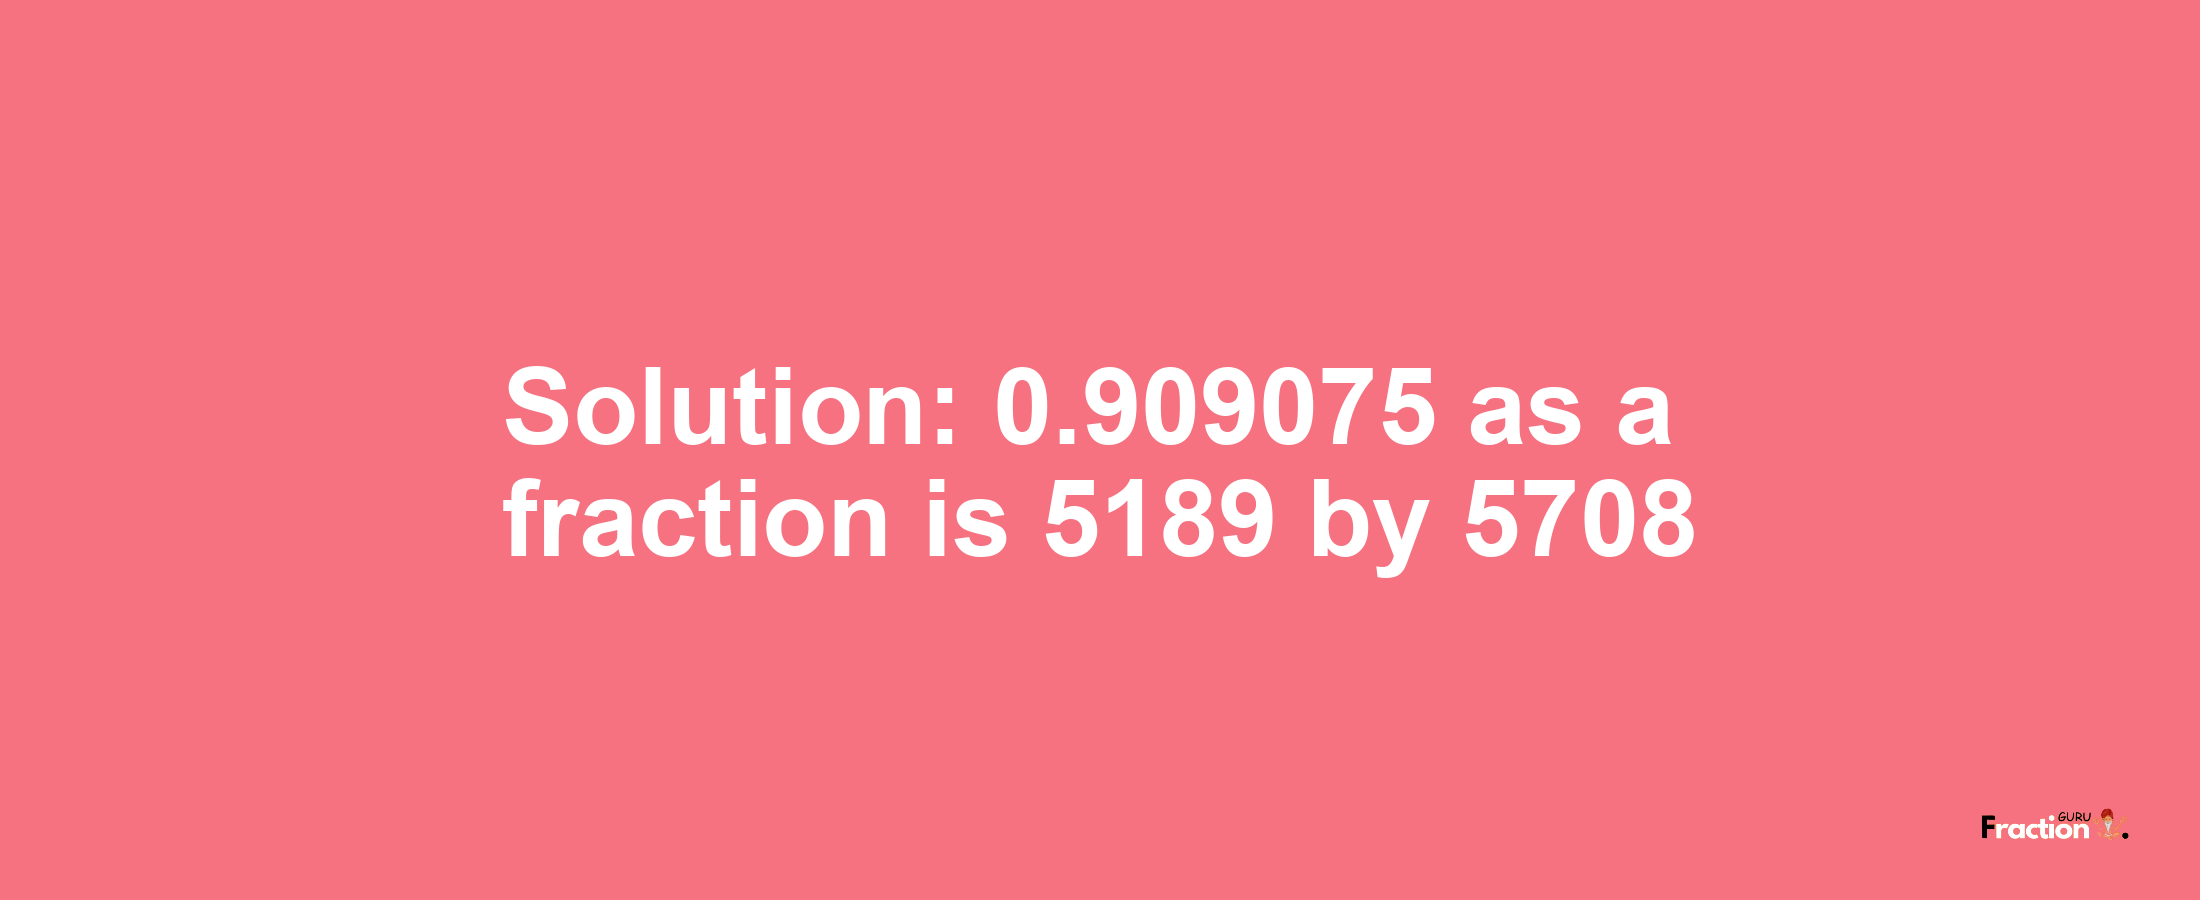 Solution:0.909075 as a fraction is 5189/5708